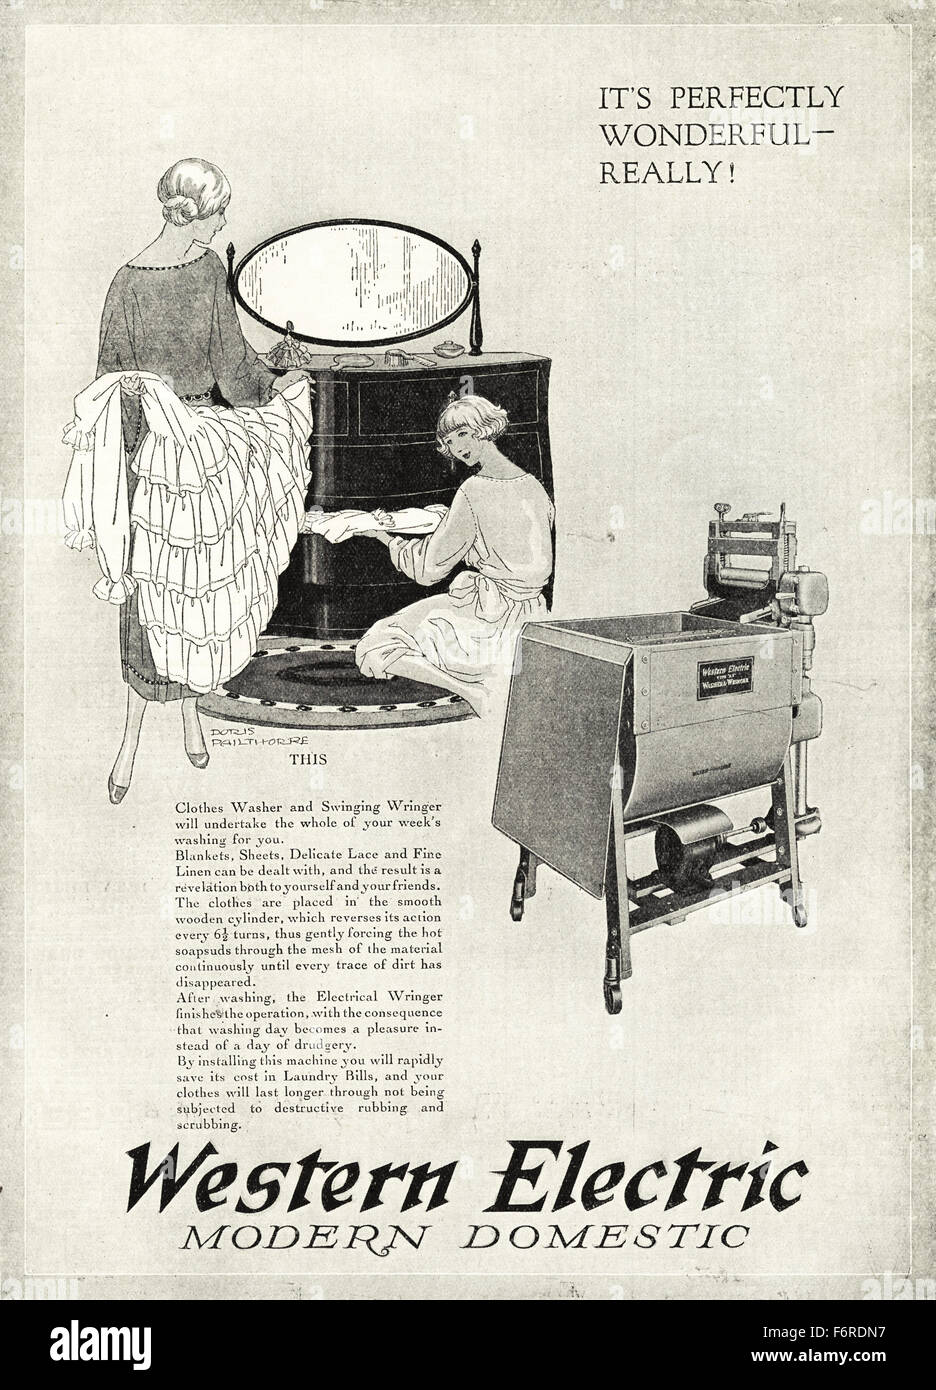 Electric Appliance 1920s High Resolution Stock Photography And Images Alamy